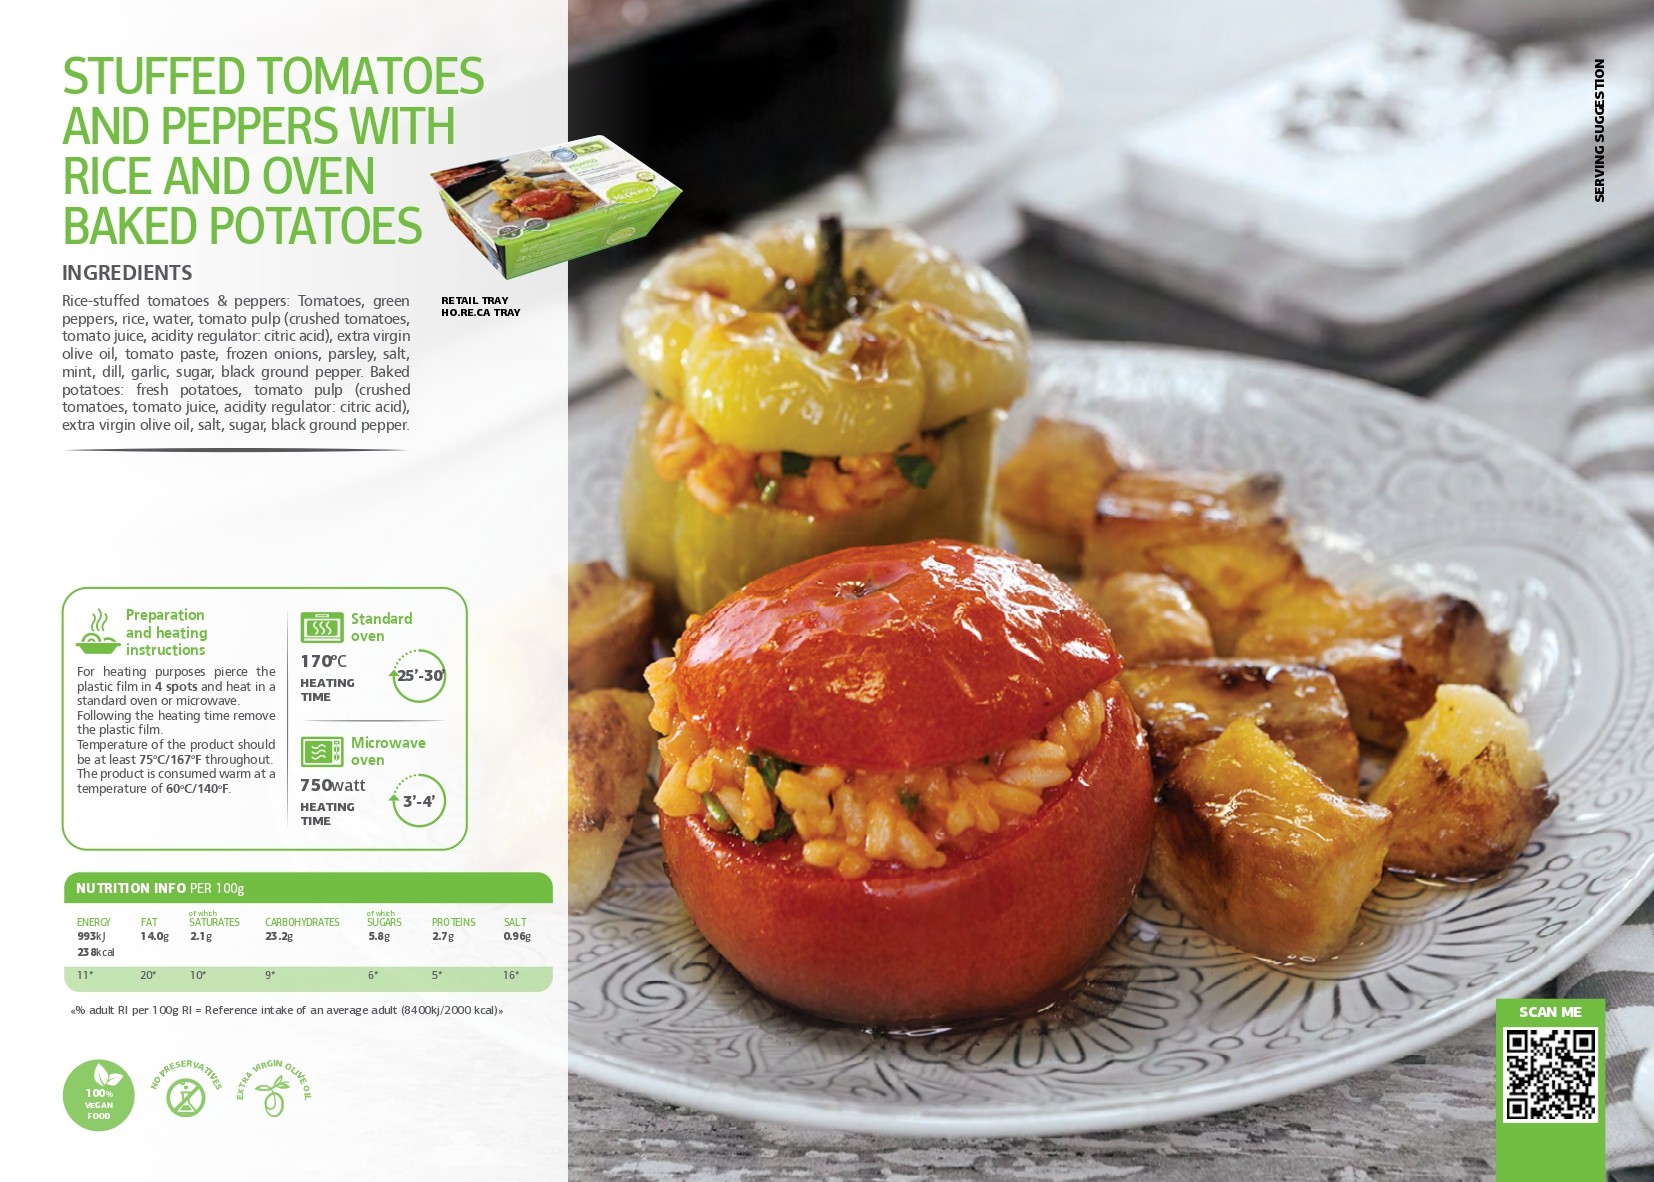 SK - Stuffed tomatoes and peppers with rice and oven baked potatoes pdf image